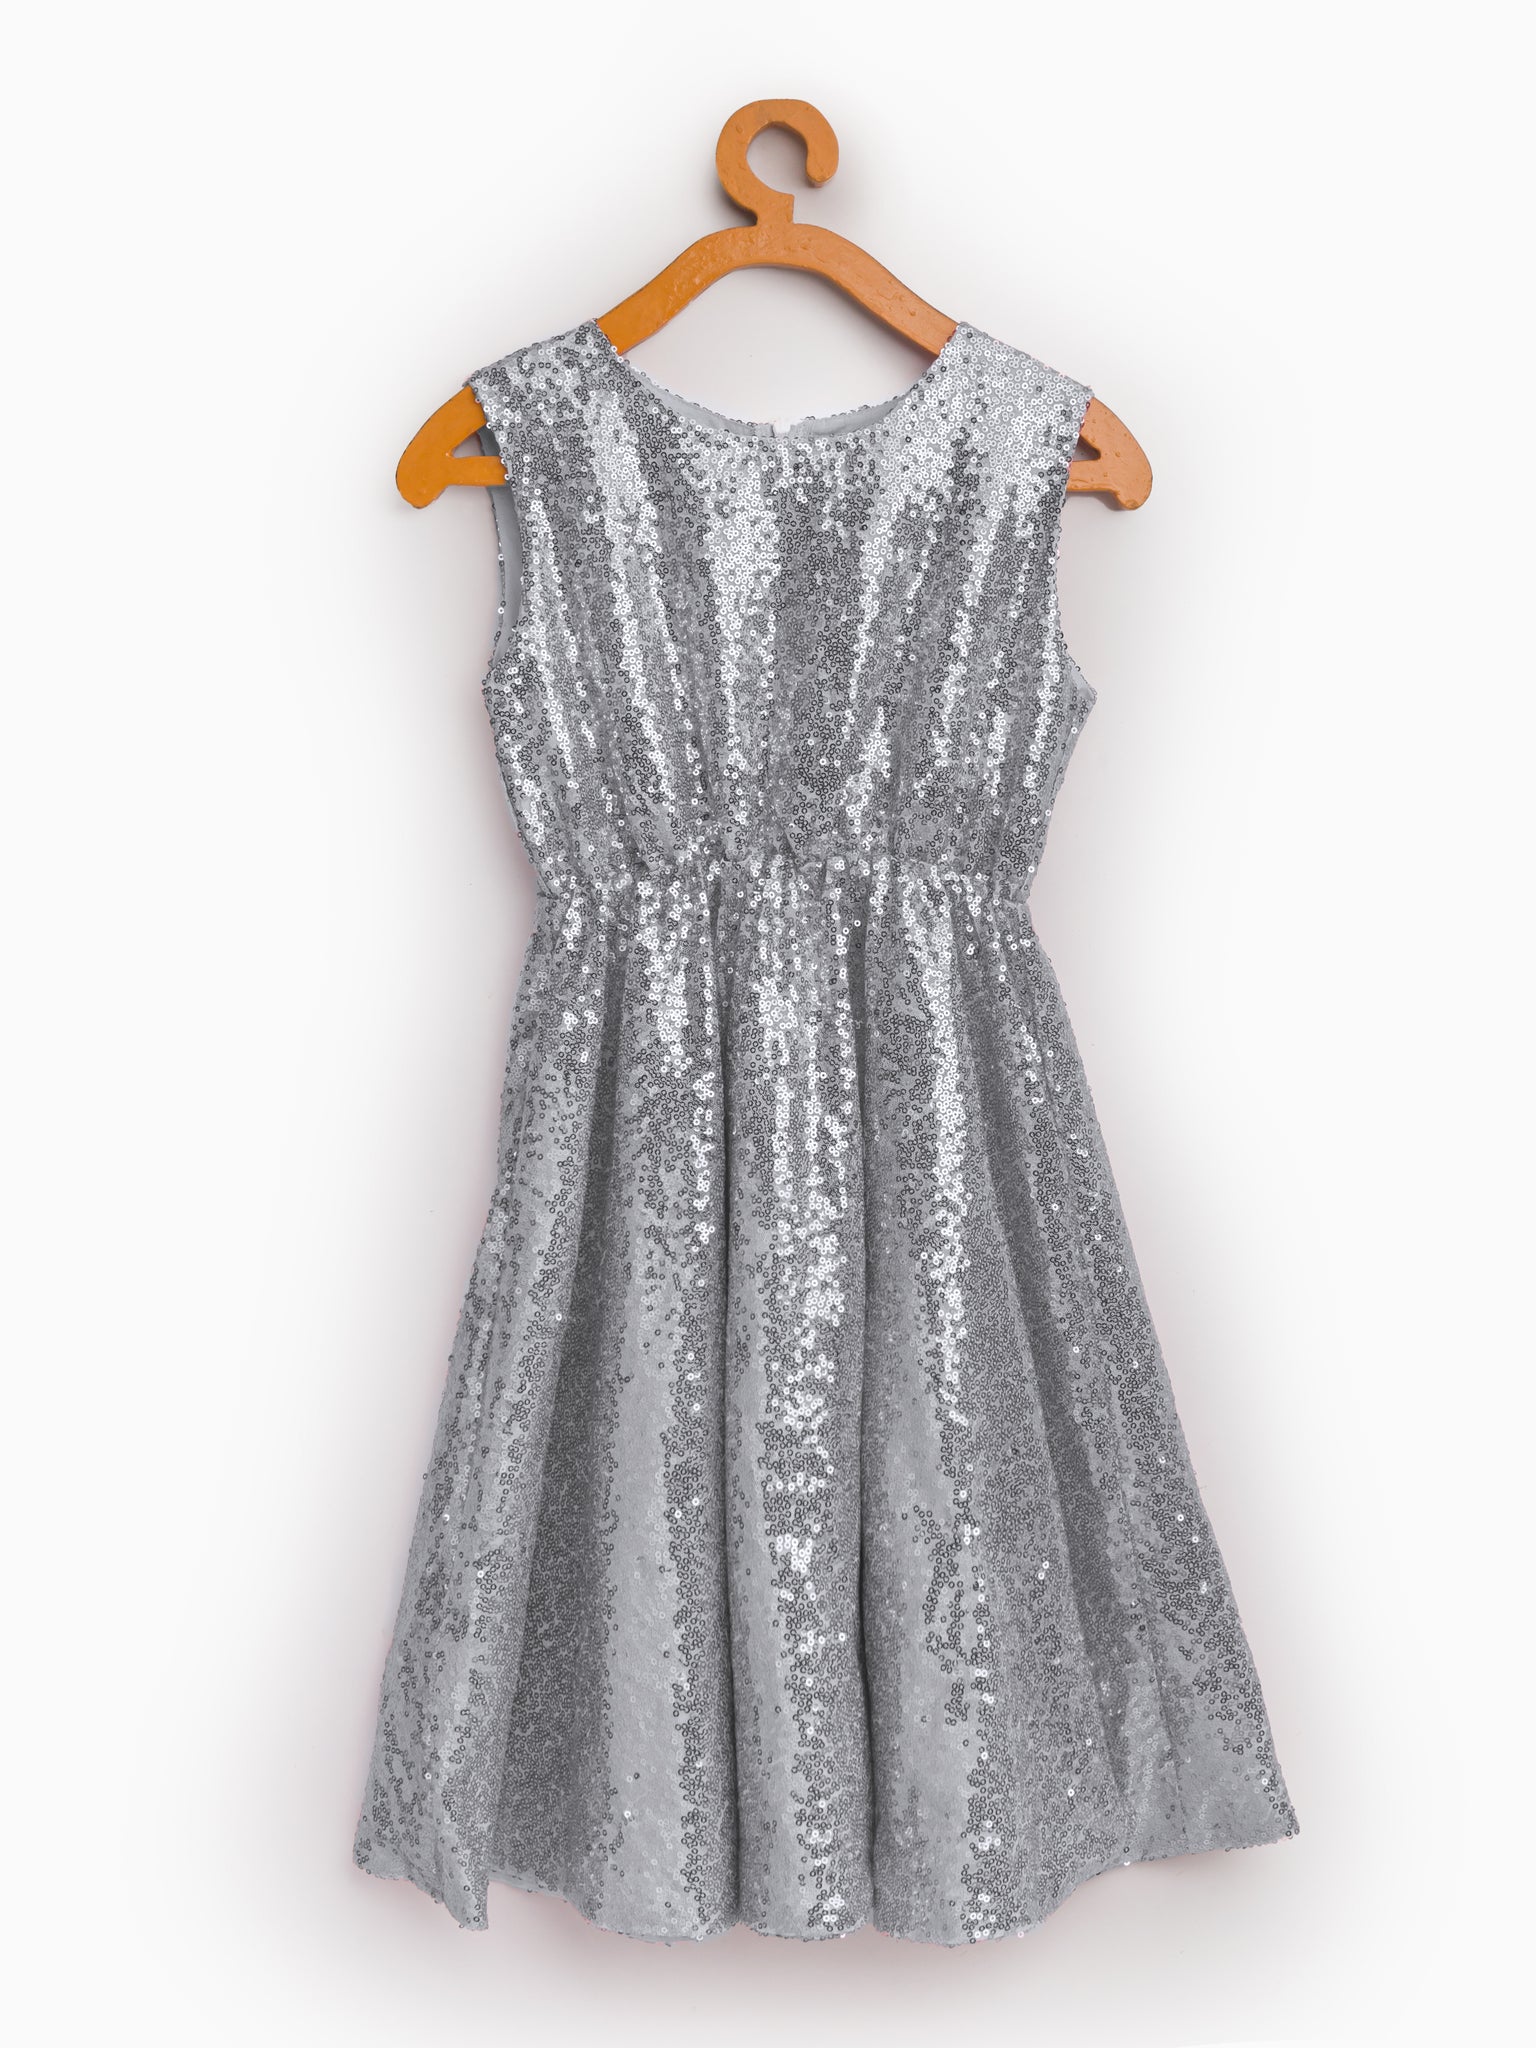 Sequin Dress for Girls - Uptownie